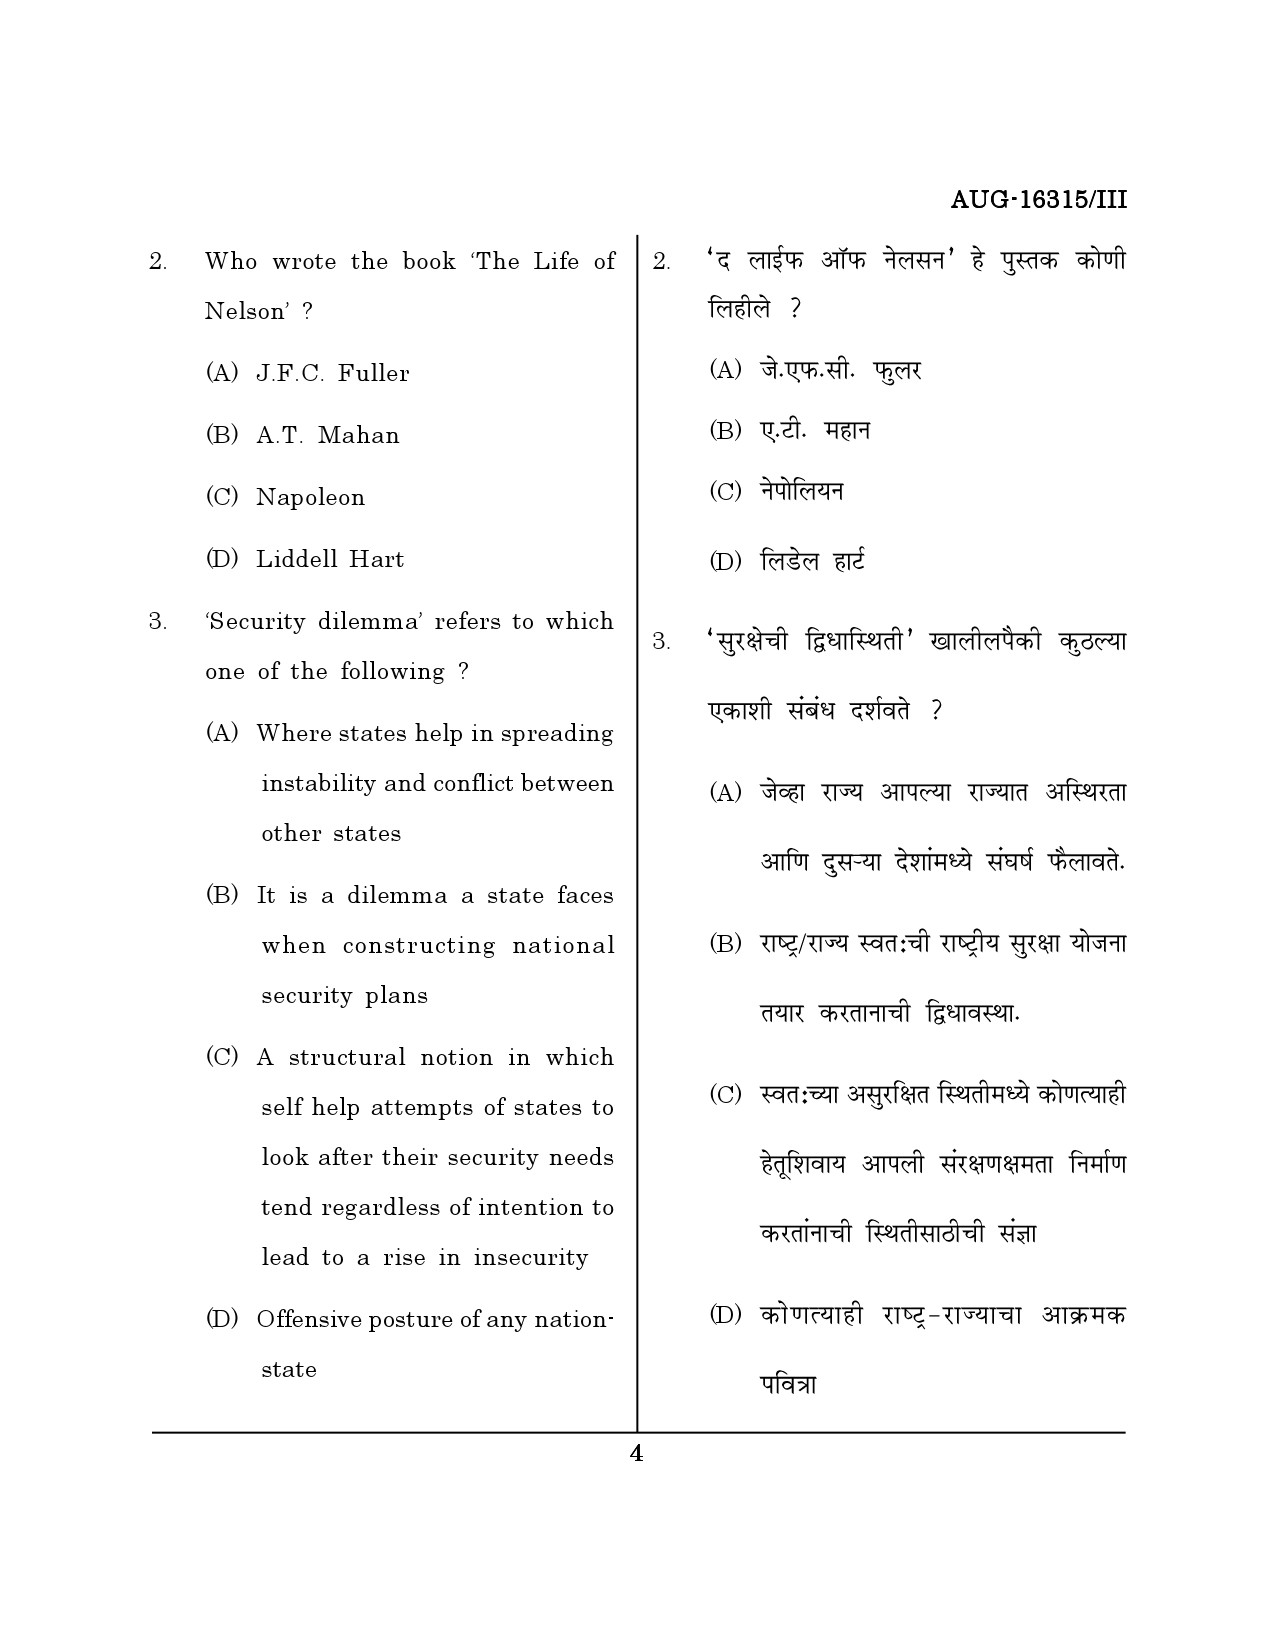 Maharashtra SET Defence and Strategic Studies Question Paper III August 2015 3